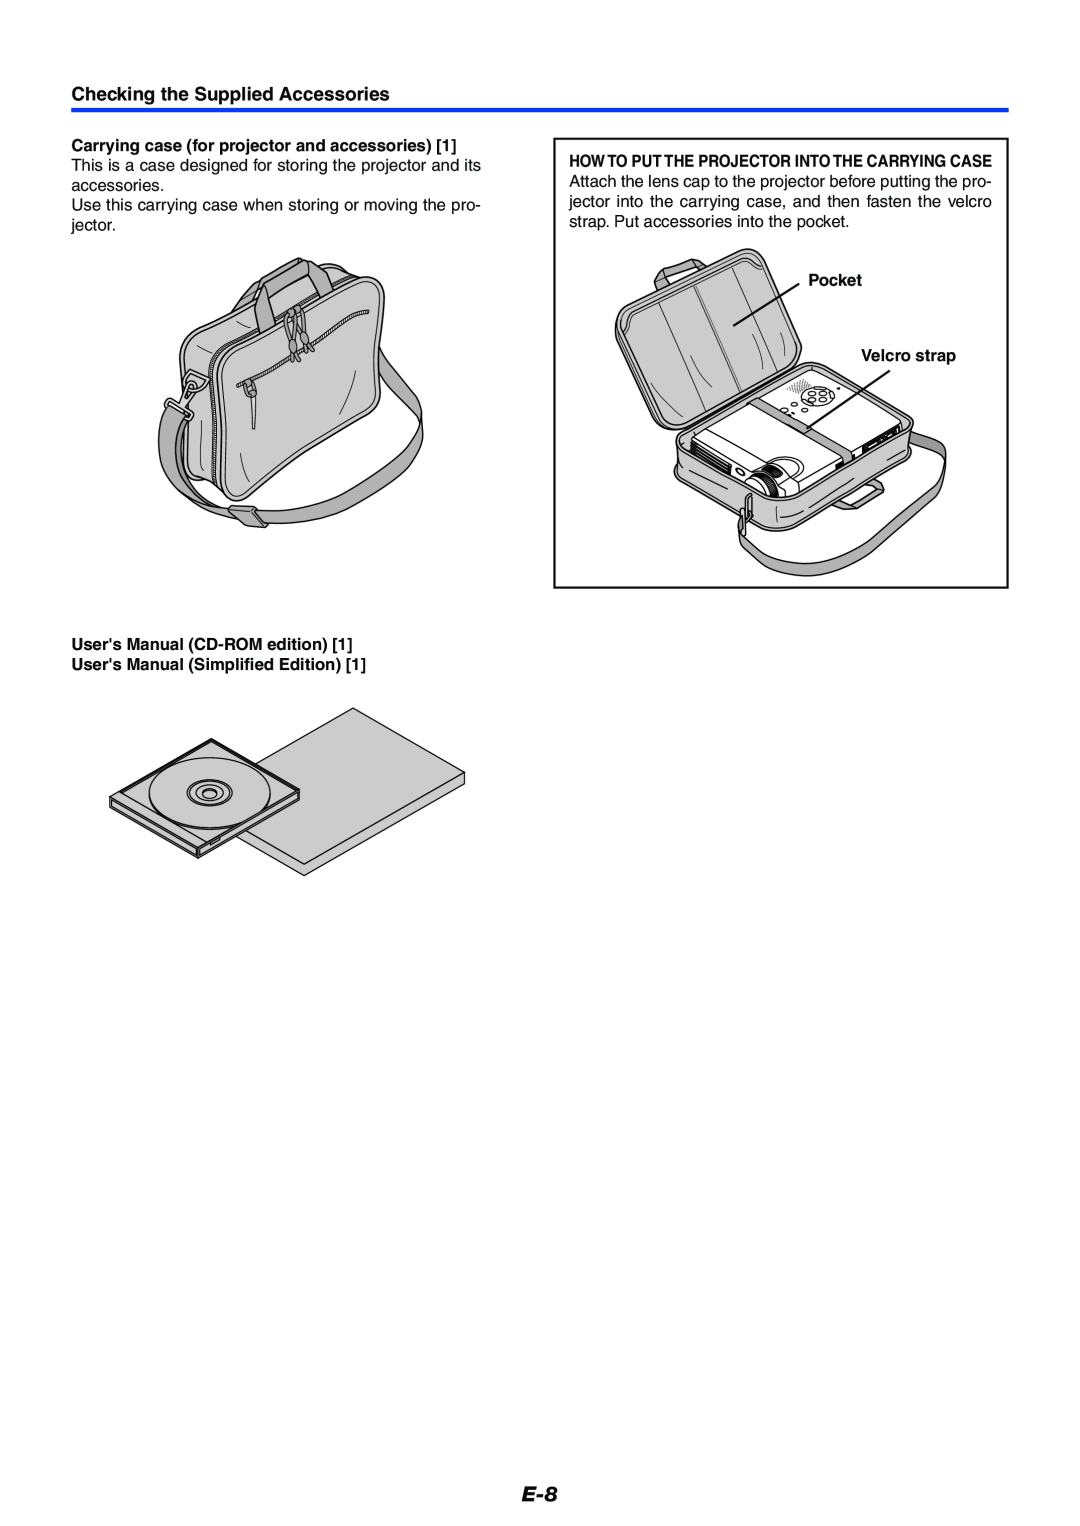 PLUS Vision Data Projector user manual Checking the Supplied Accessories, Carrying case for projector and accessories 